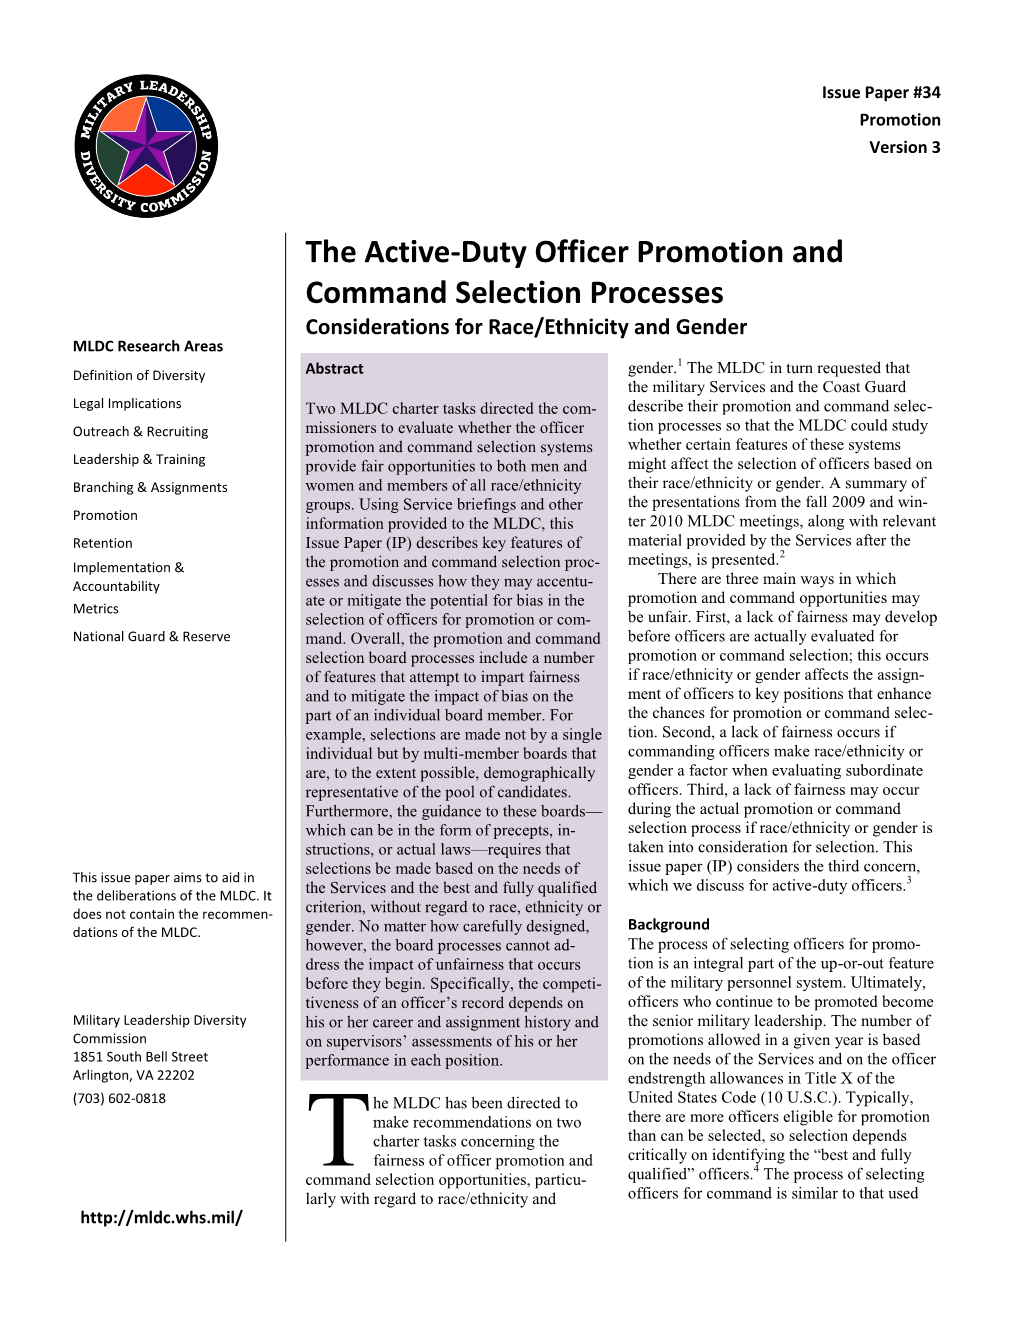 The Active-Duty Officer Promotion and Command Selection Processes